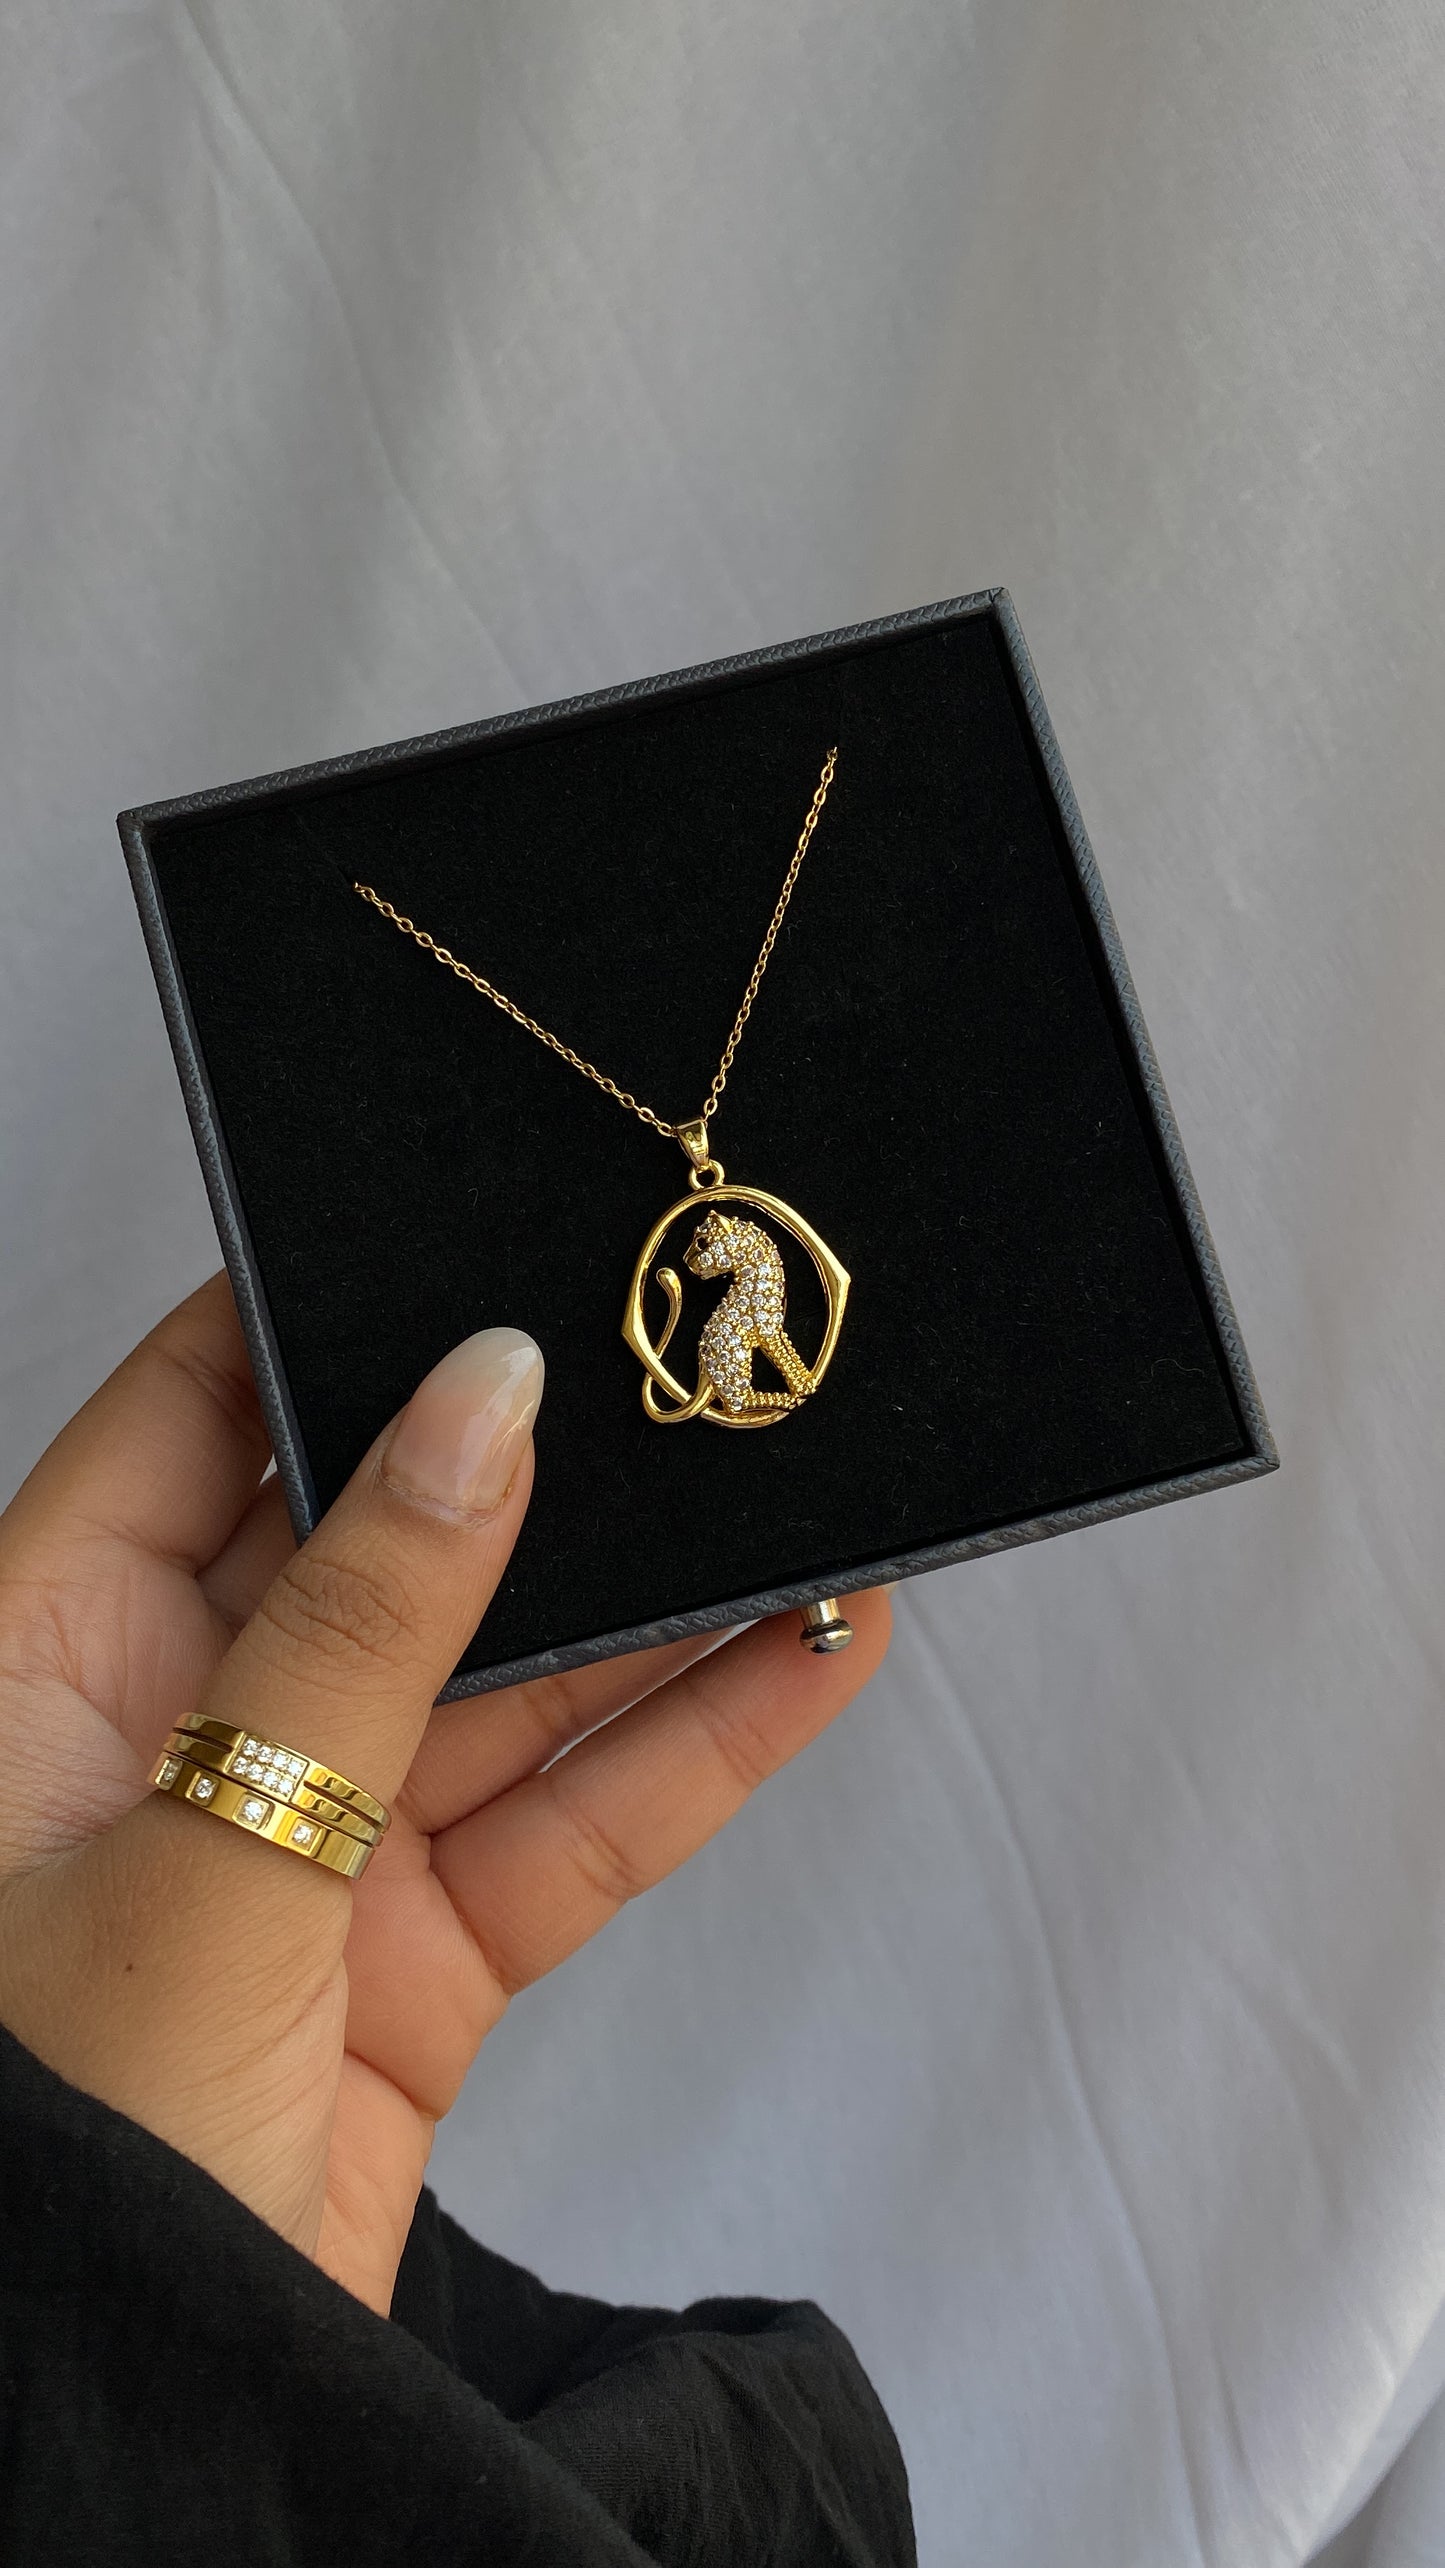 Royalty combo (7 limited edition necklaces)